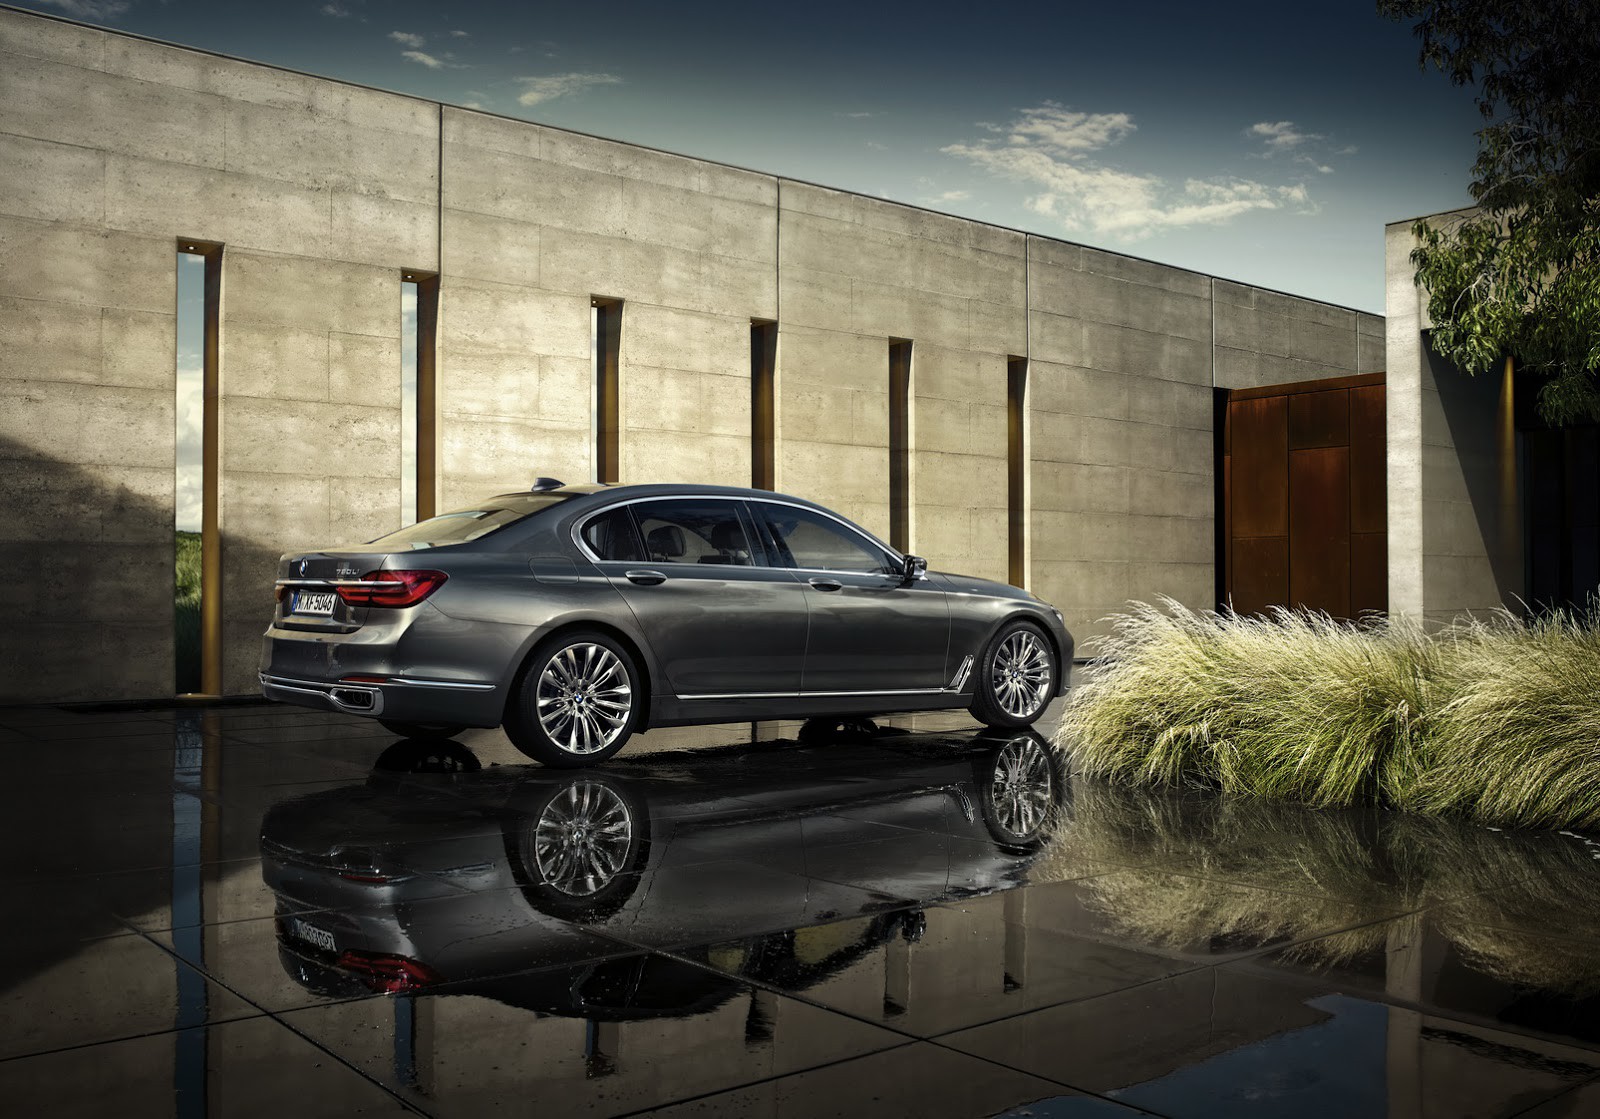 The new BMW 7 series